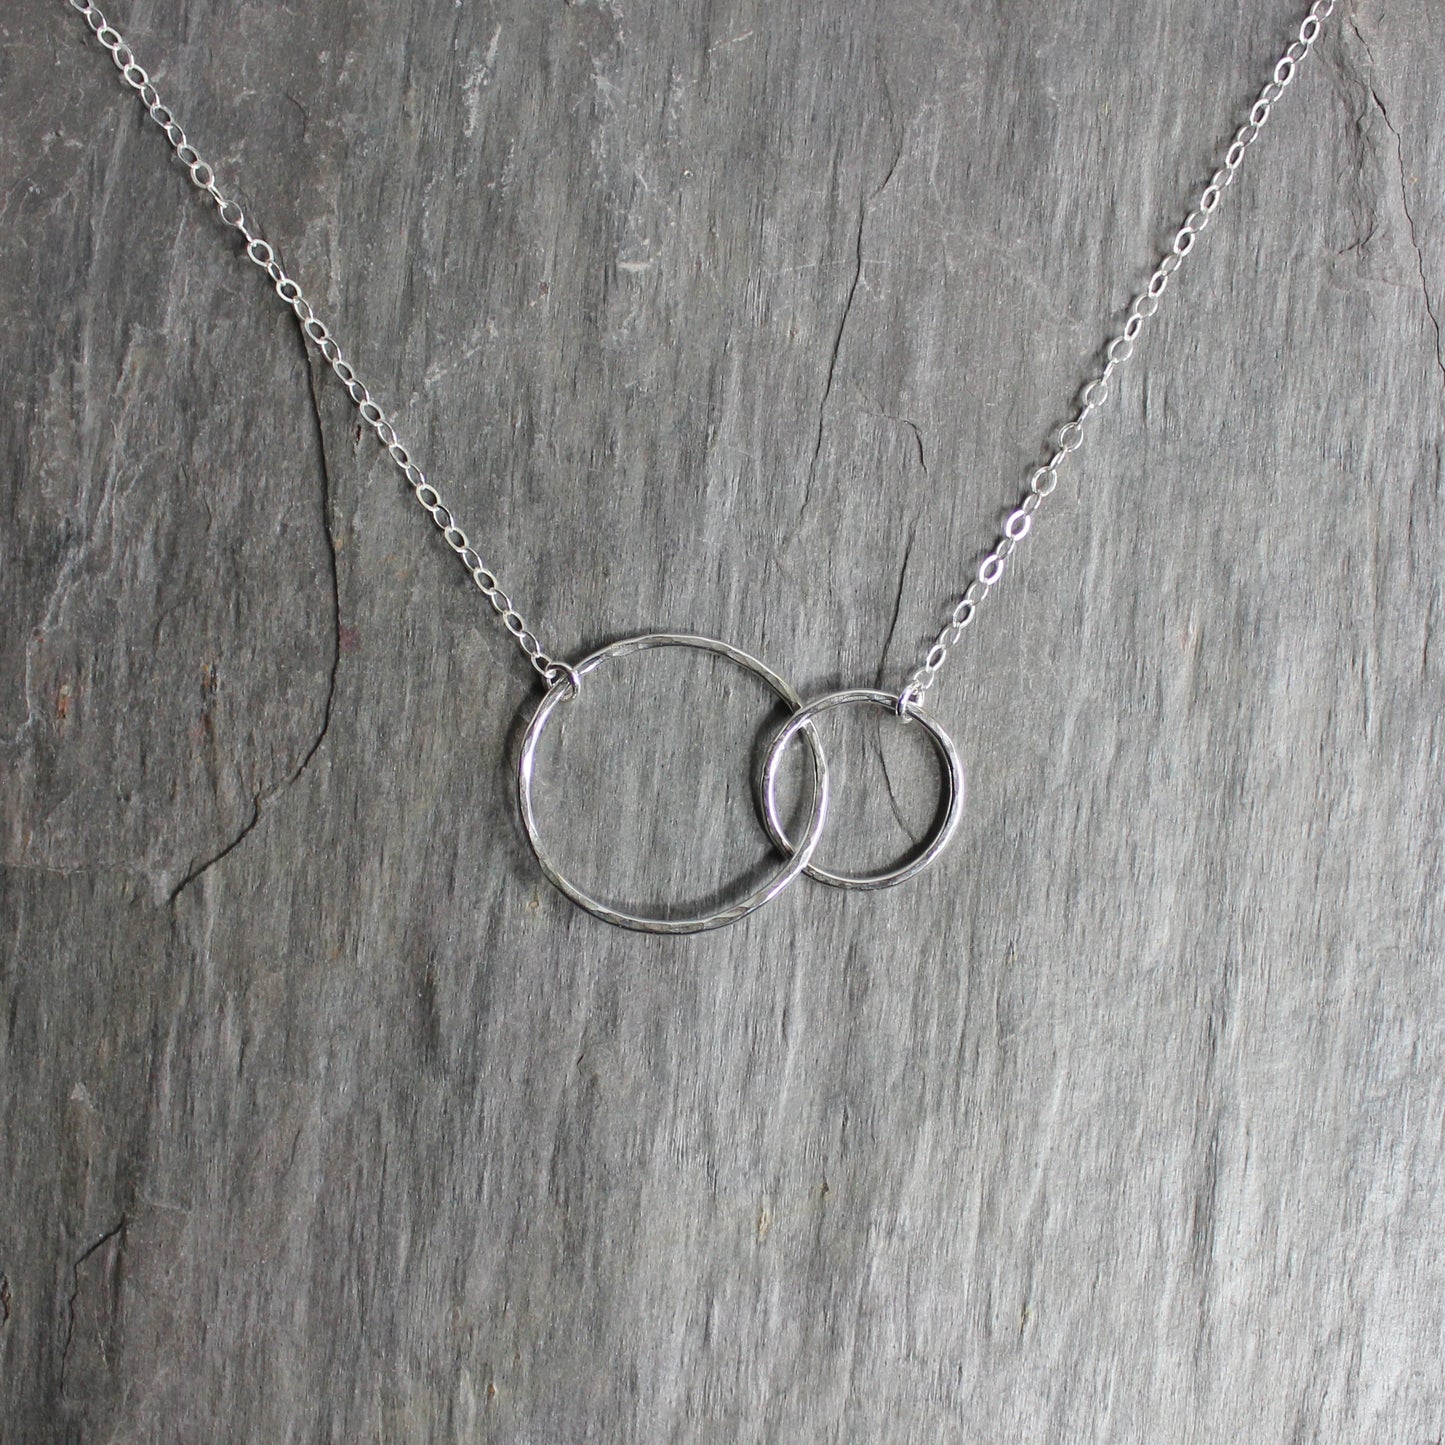 A one inch hammered circle and a 1/2 inch hammered circle interlocking and attached to sterling silver chain to make a elegant necklace.